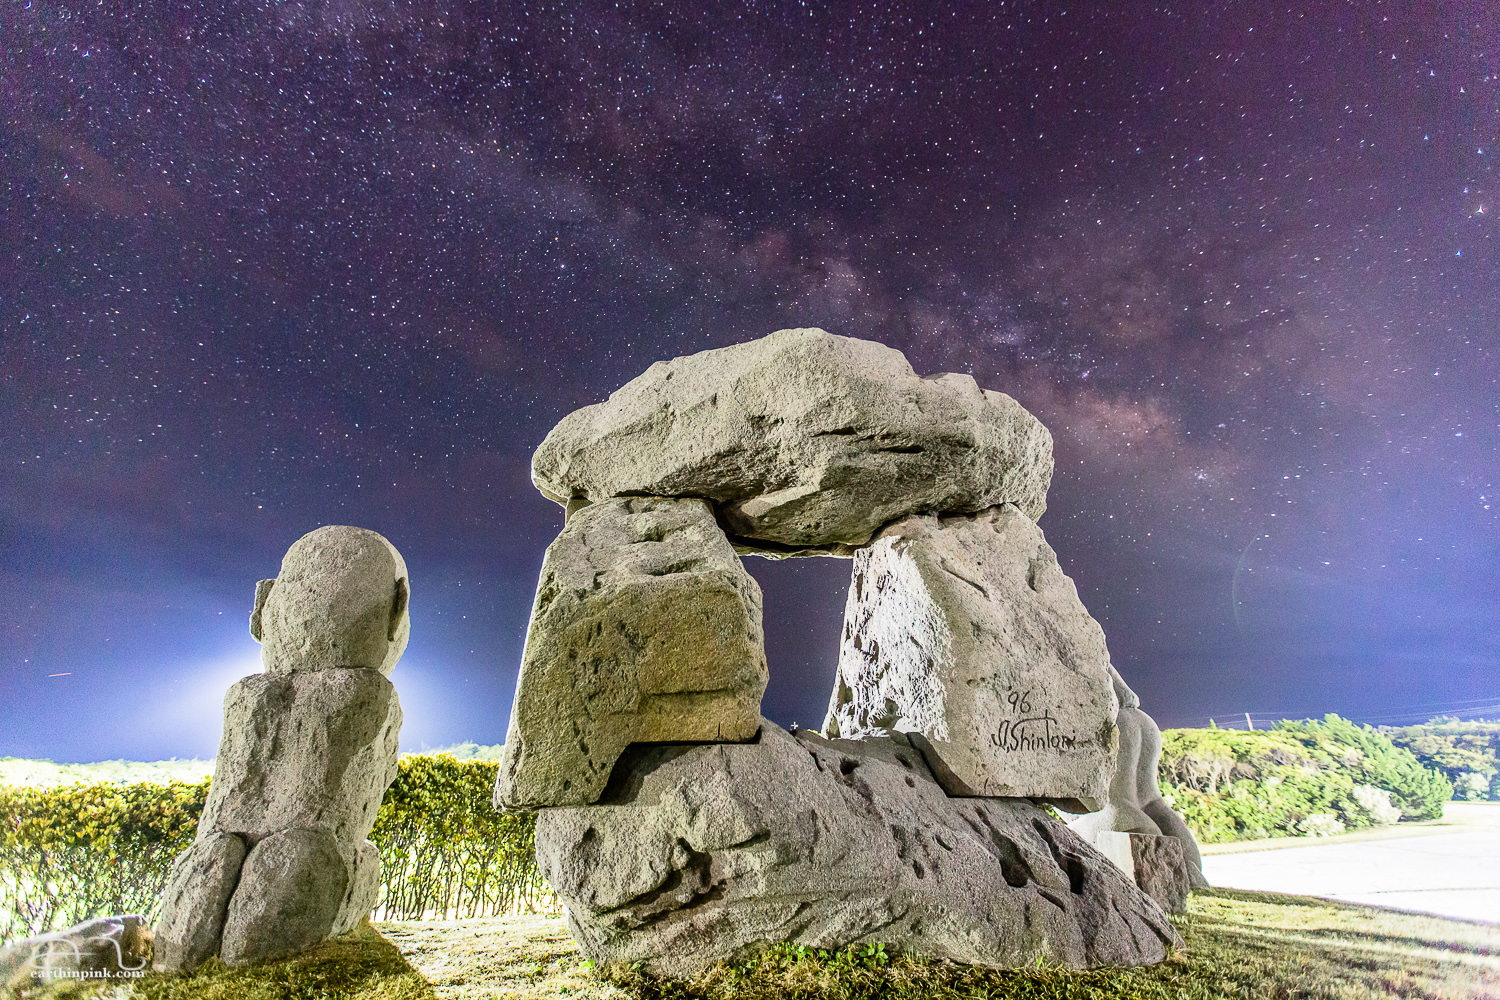 Stone statues in the park very close to our campground reminded us of the magic of Stonehenge, especially with the Milky Way as a backdrop.